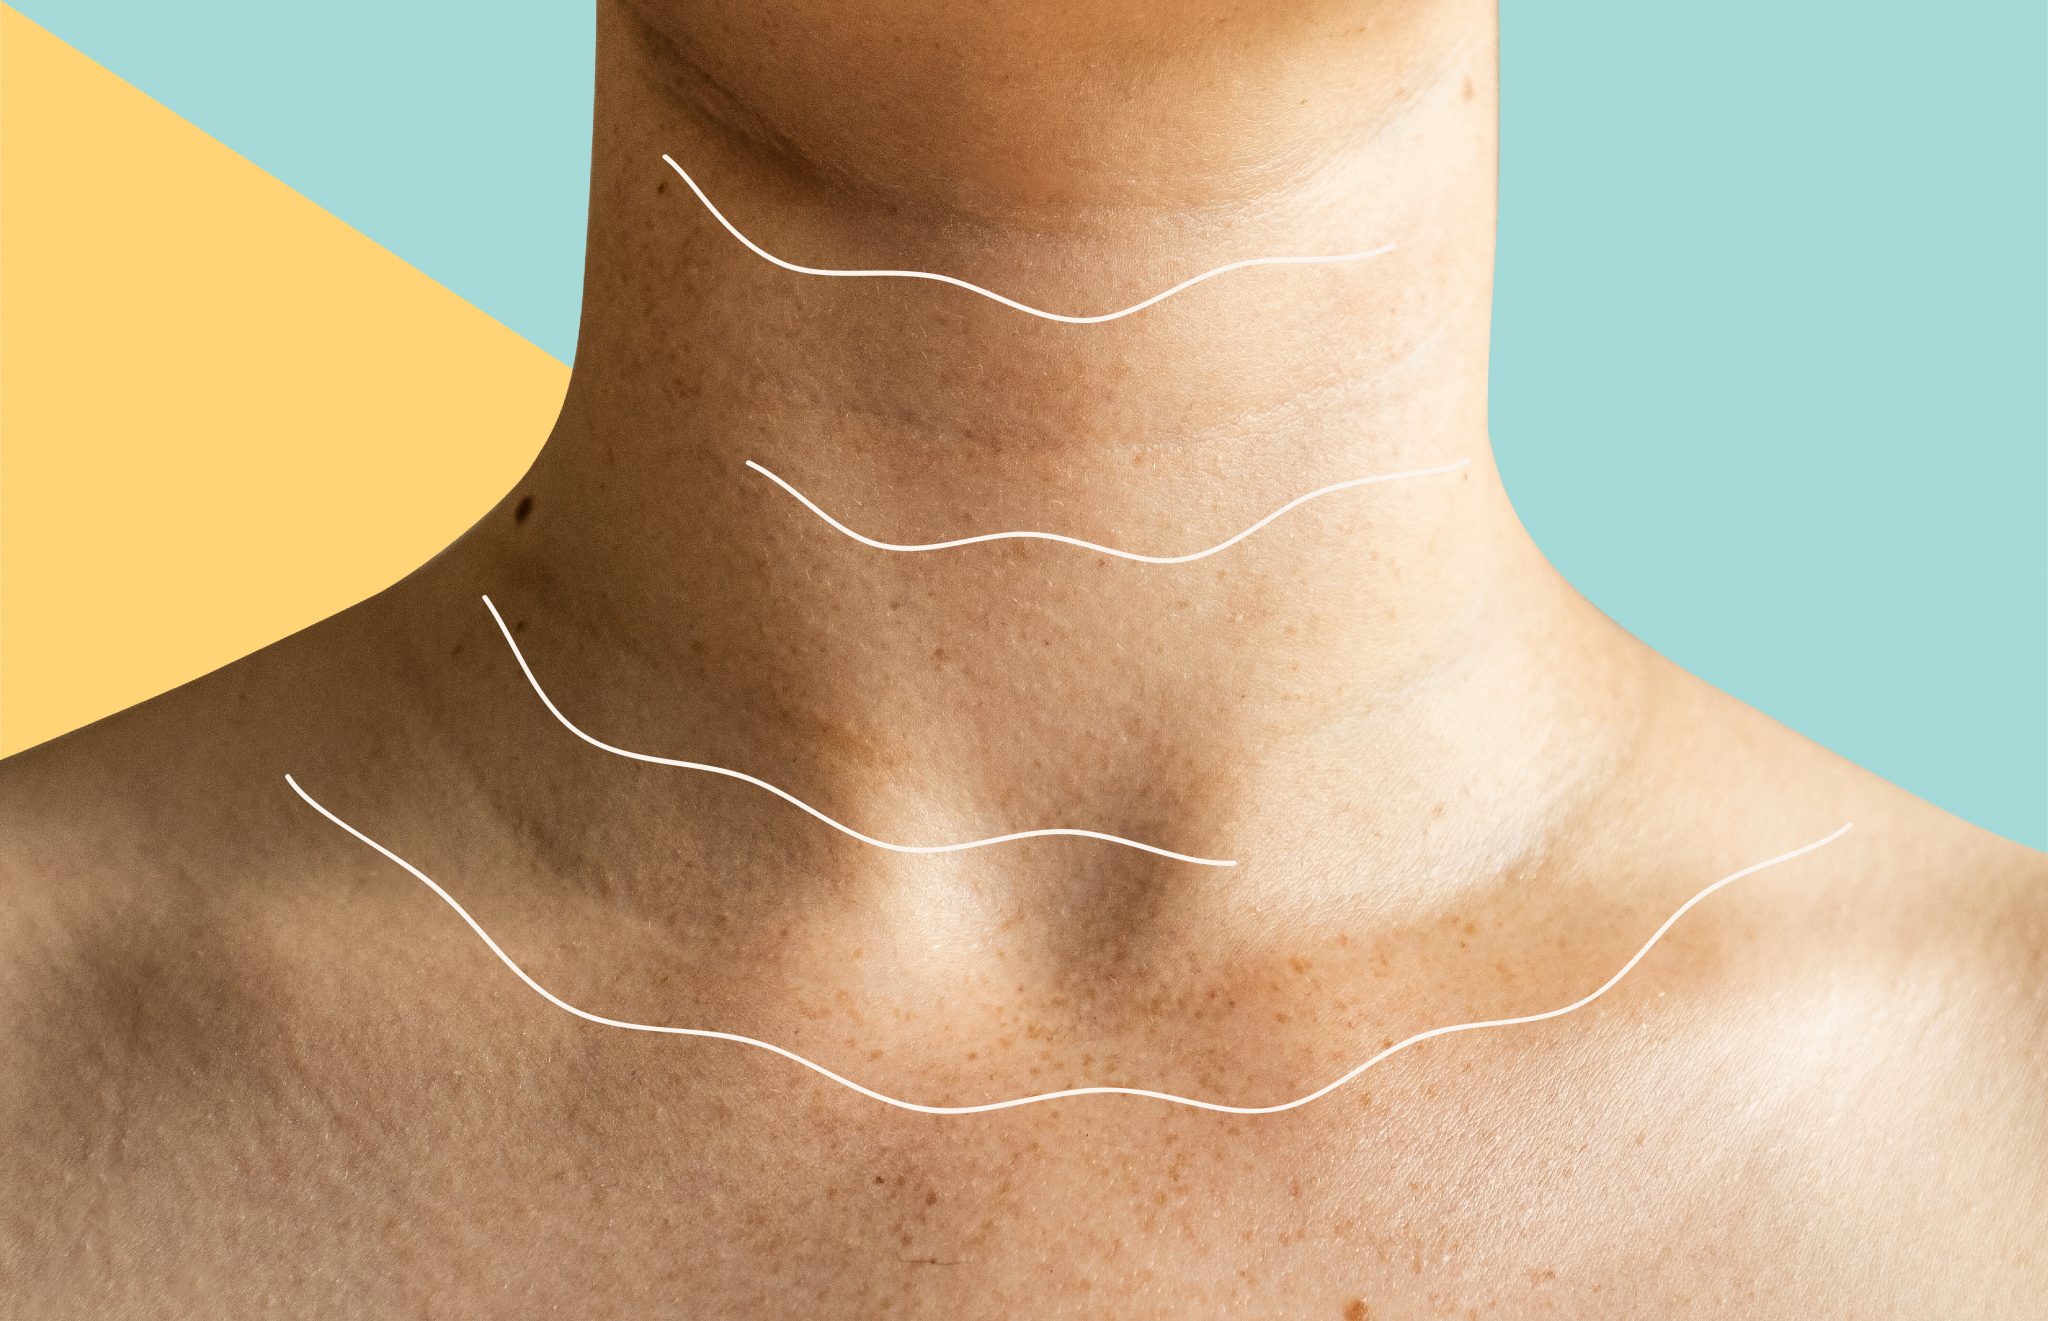 How To Prevent And Get Rid Of Tech Neck According To Skincare Experts